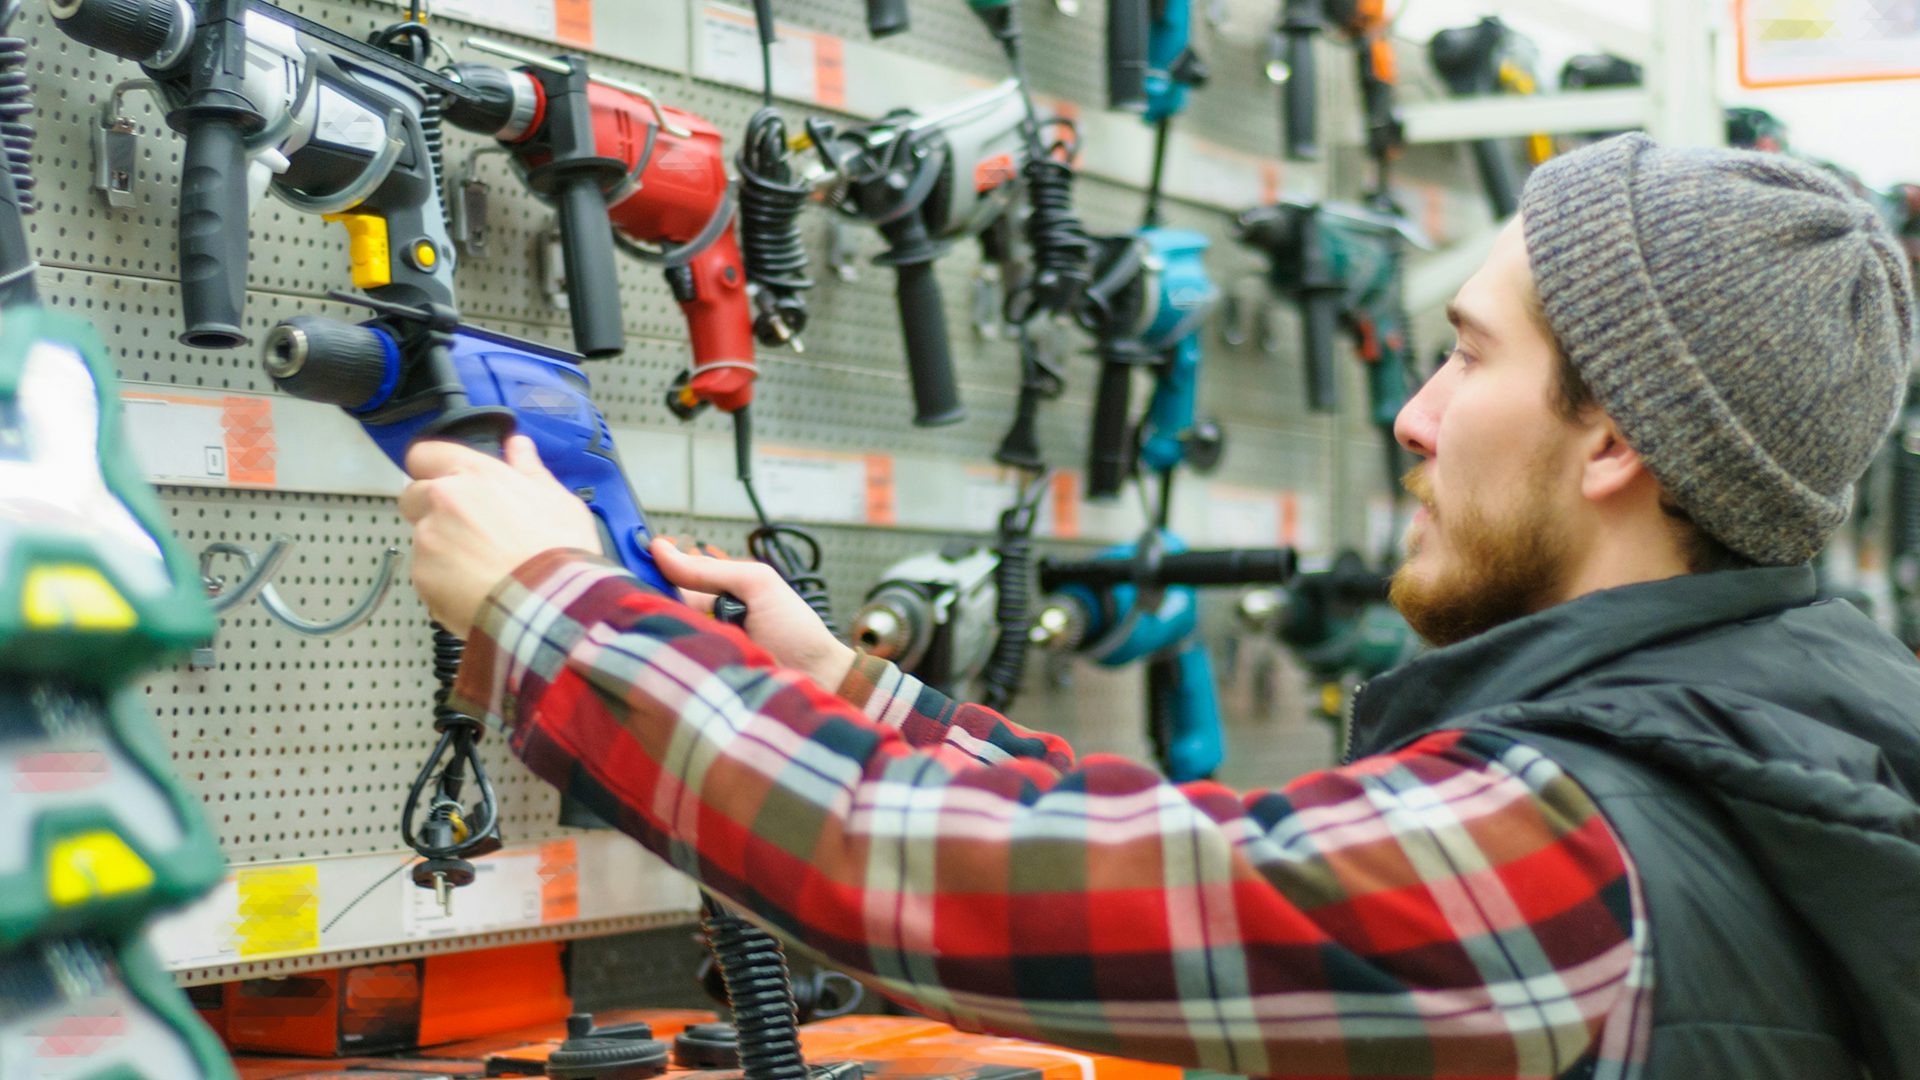 A man in a tool shop picking out a drill.